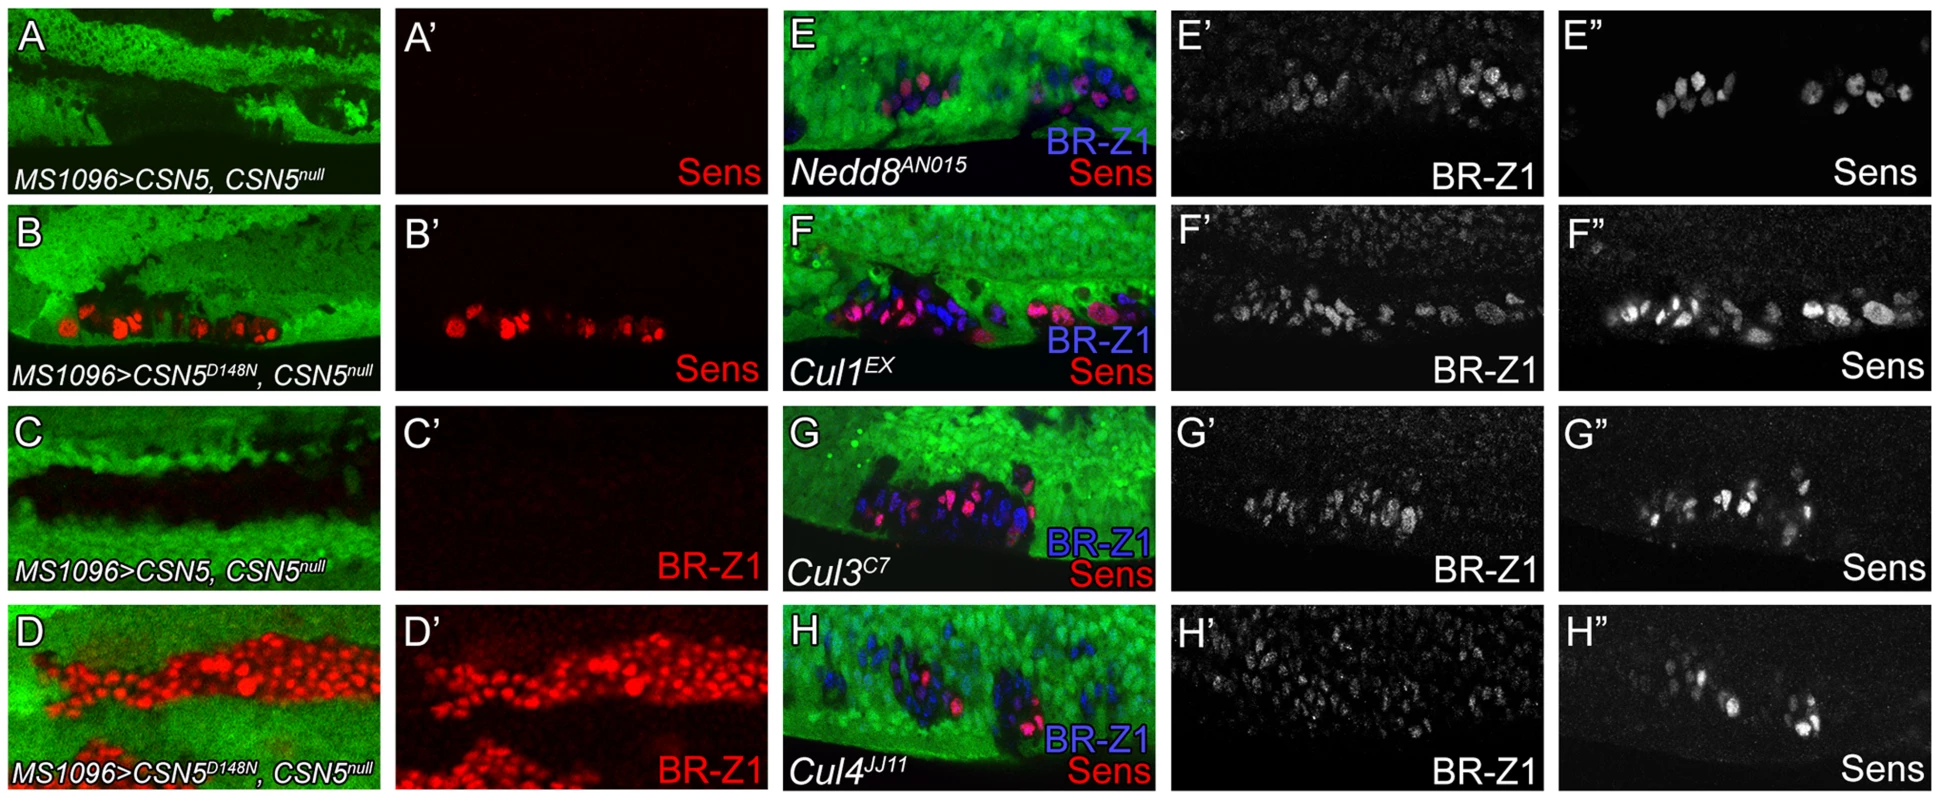 Deneddylation/neddylation and multiple cullins suppress BR-Z1 and Sens expressions at the PWM.